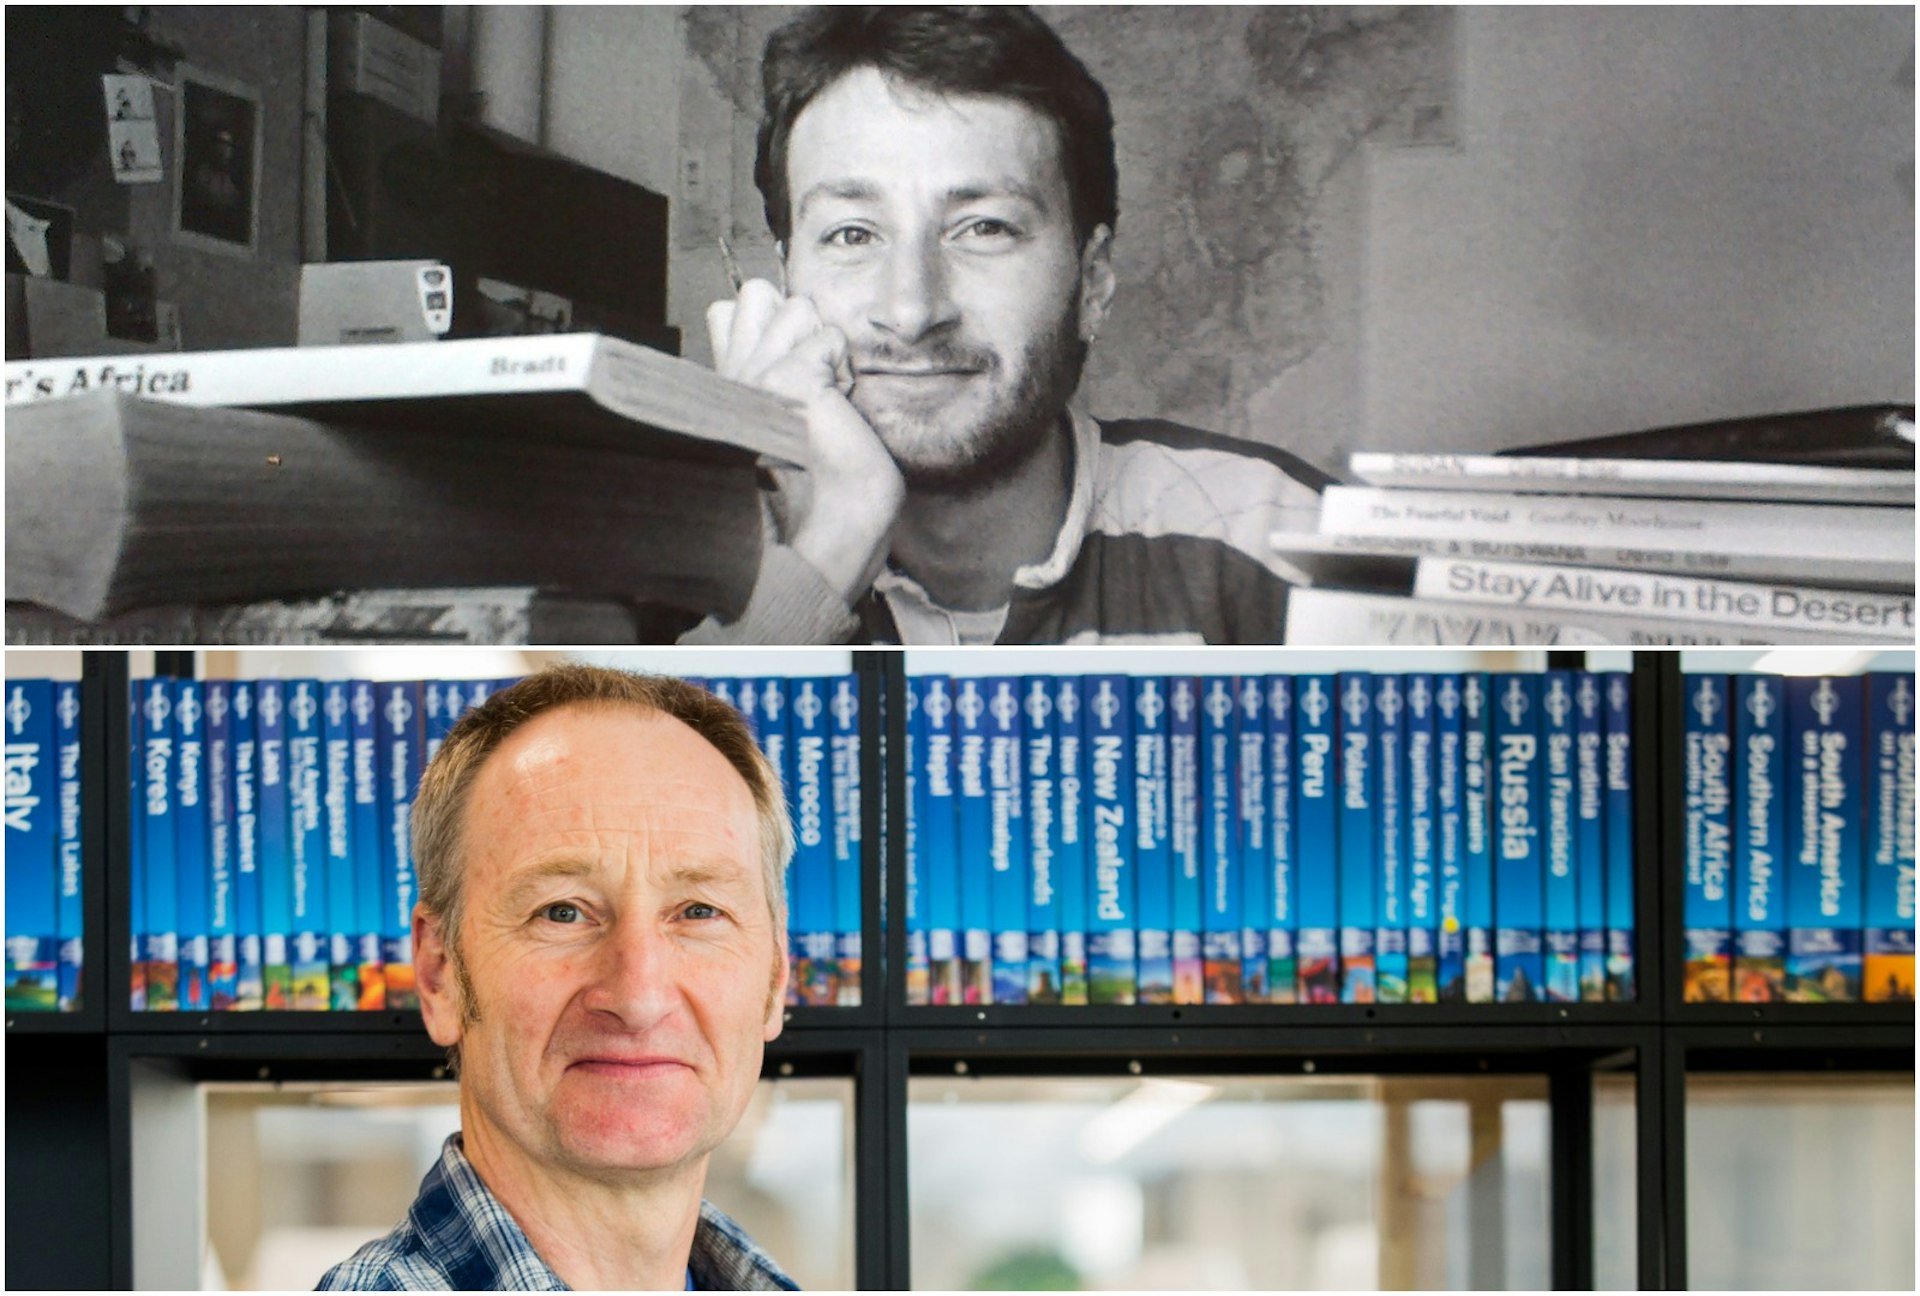 David Else at his writing desk in 1987 and below in the London Lonely Planet office in 2017